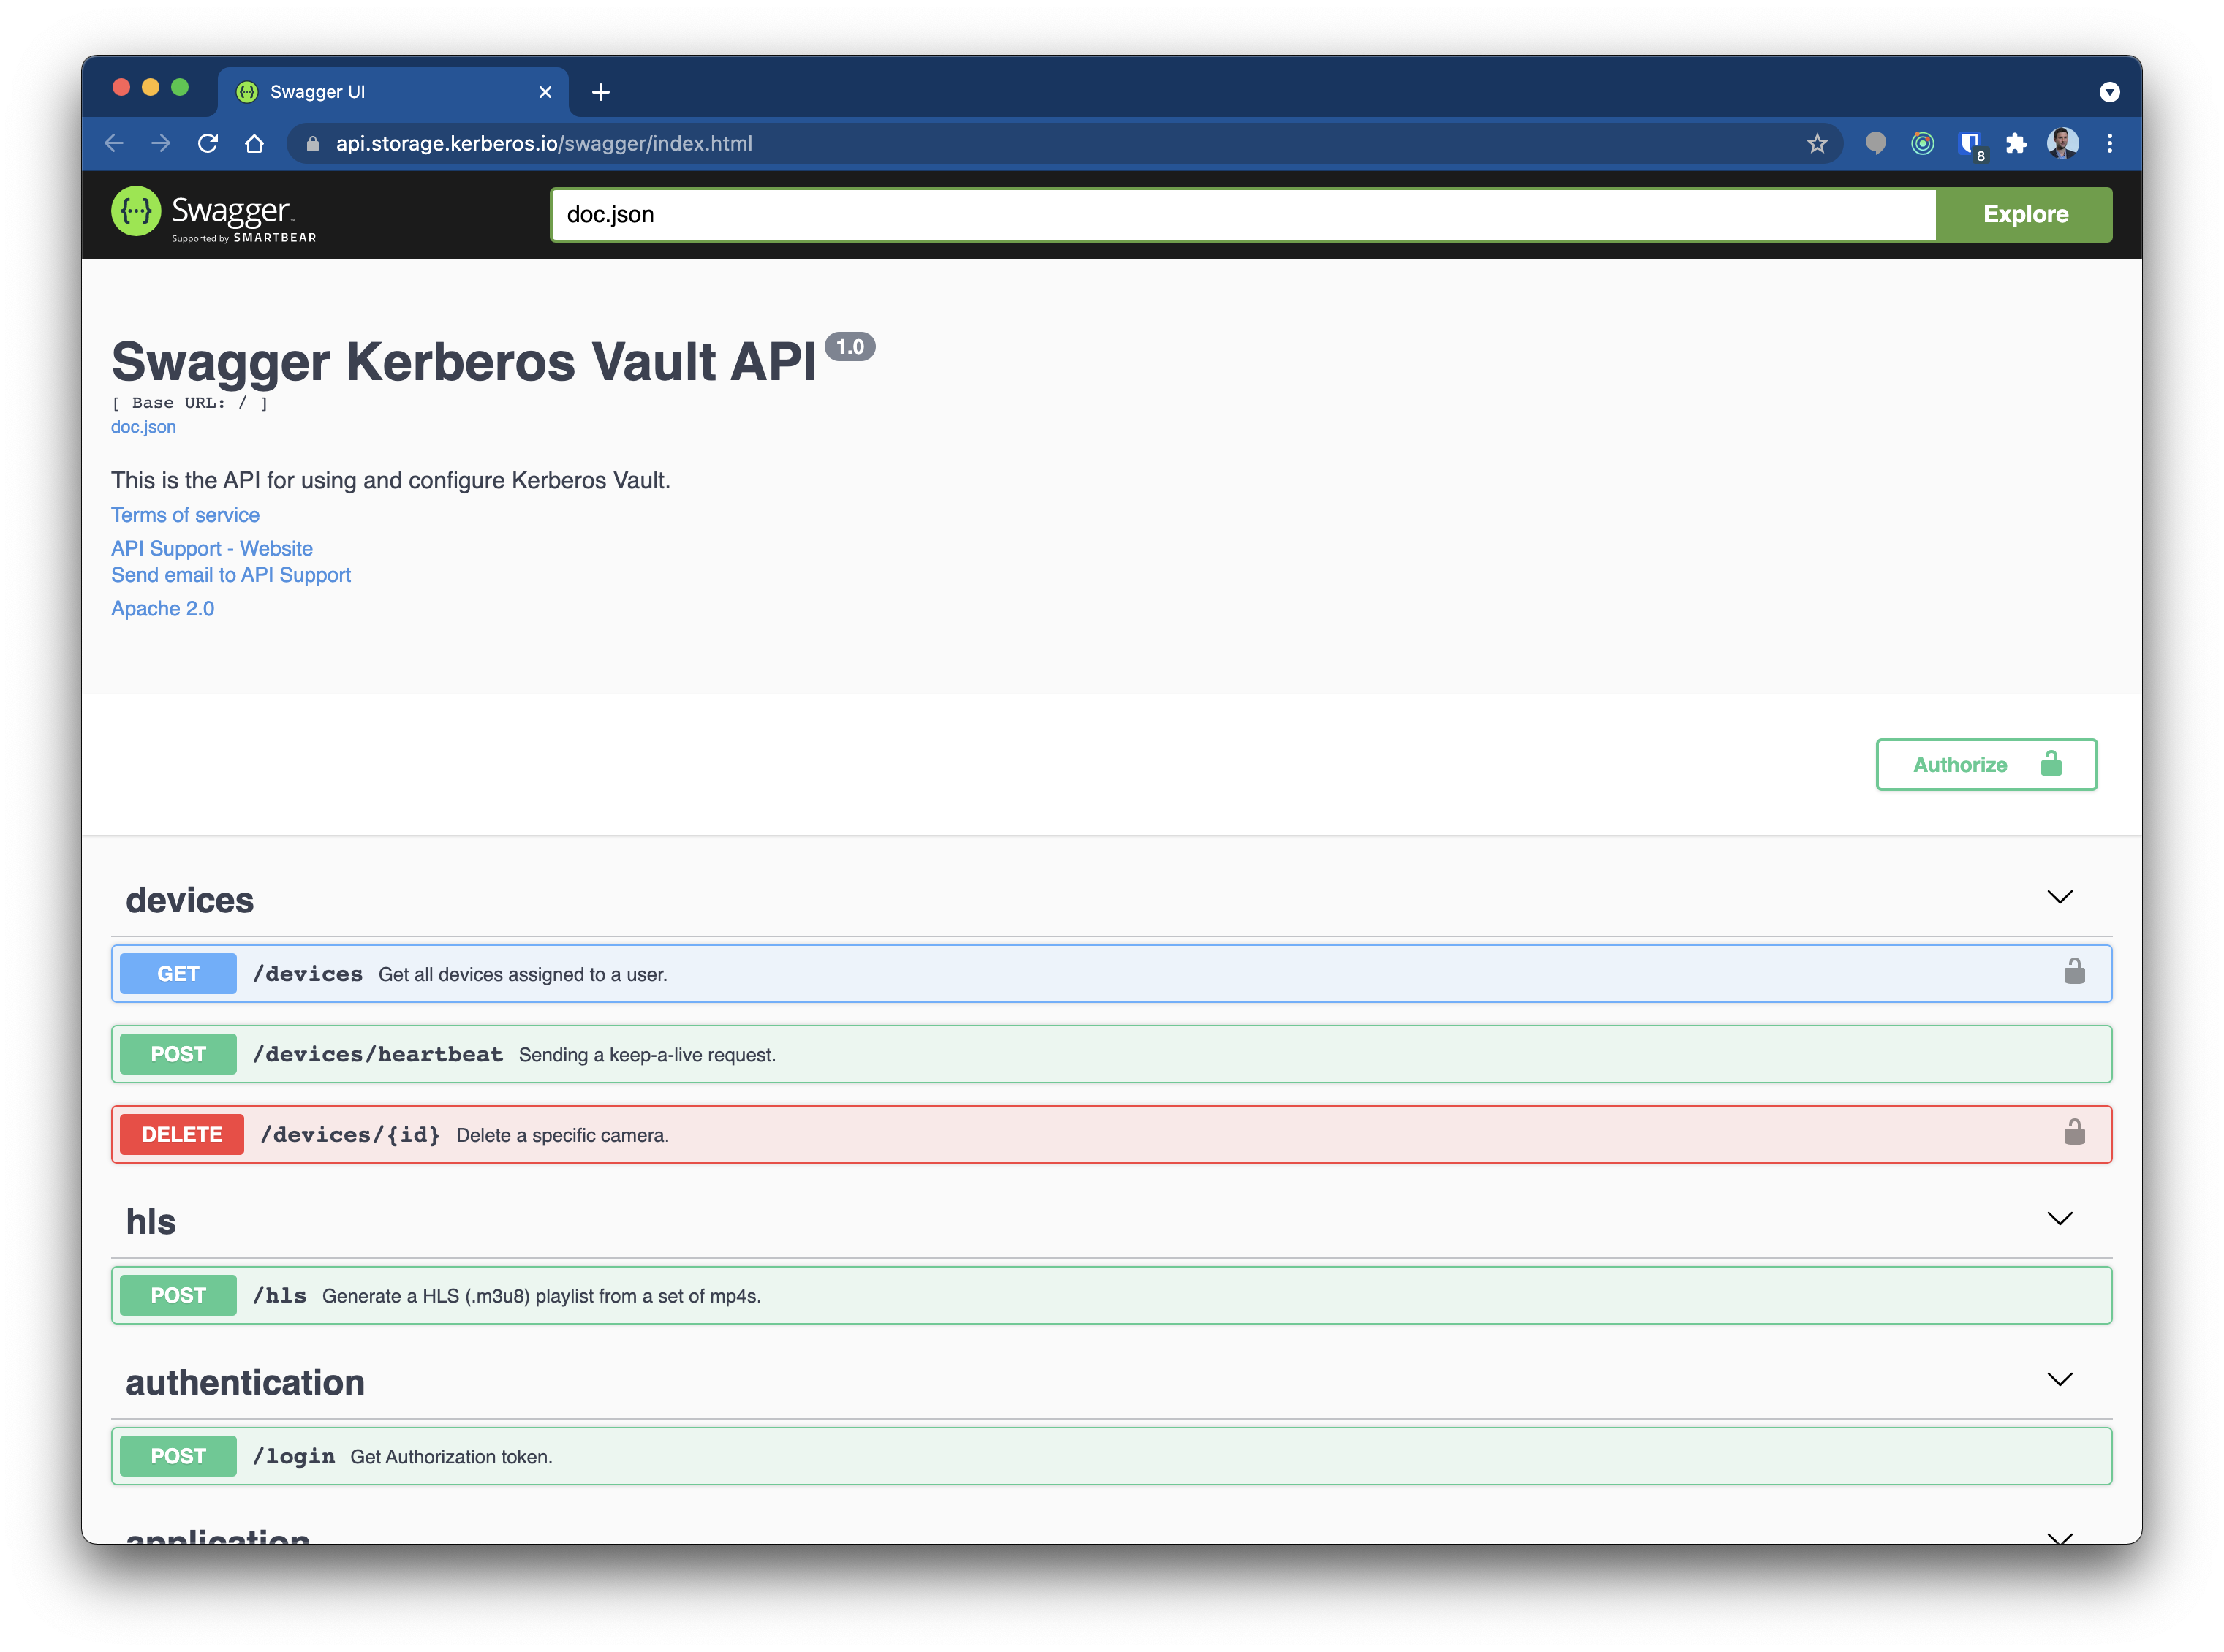 All capabilities of Kerberos Vault are documented through swagger API's.